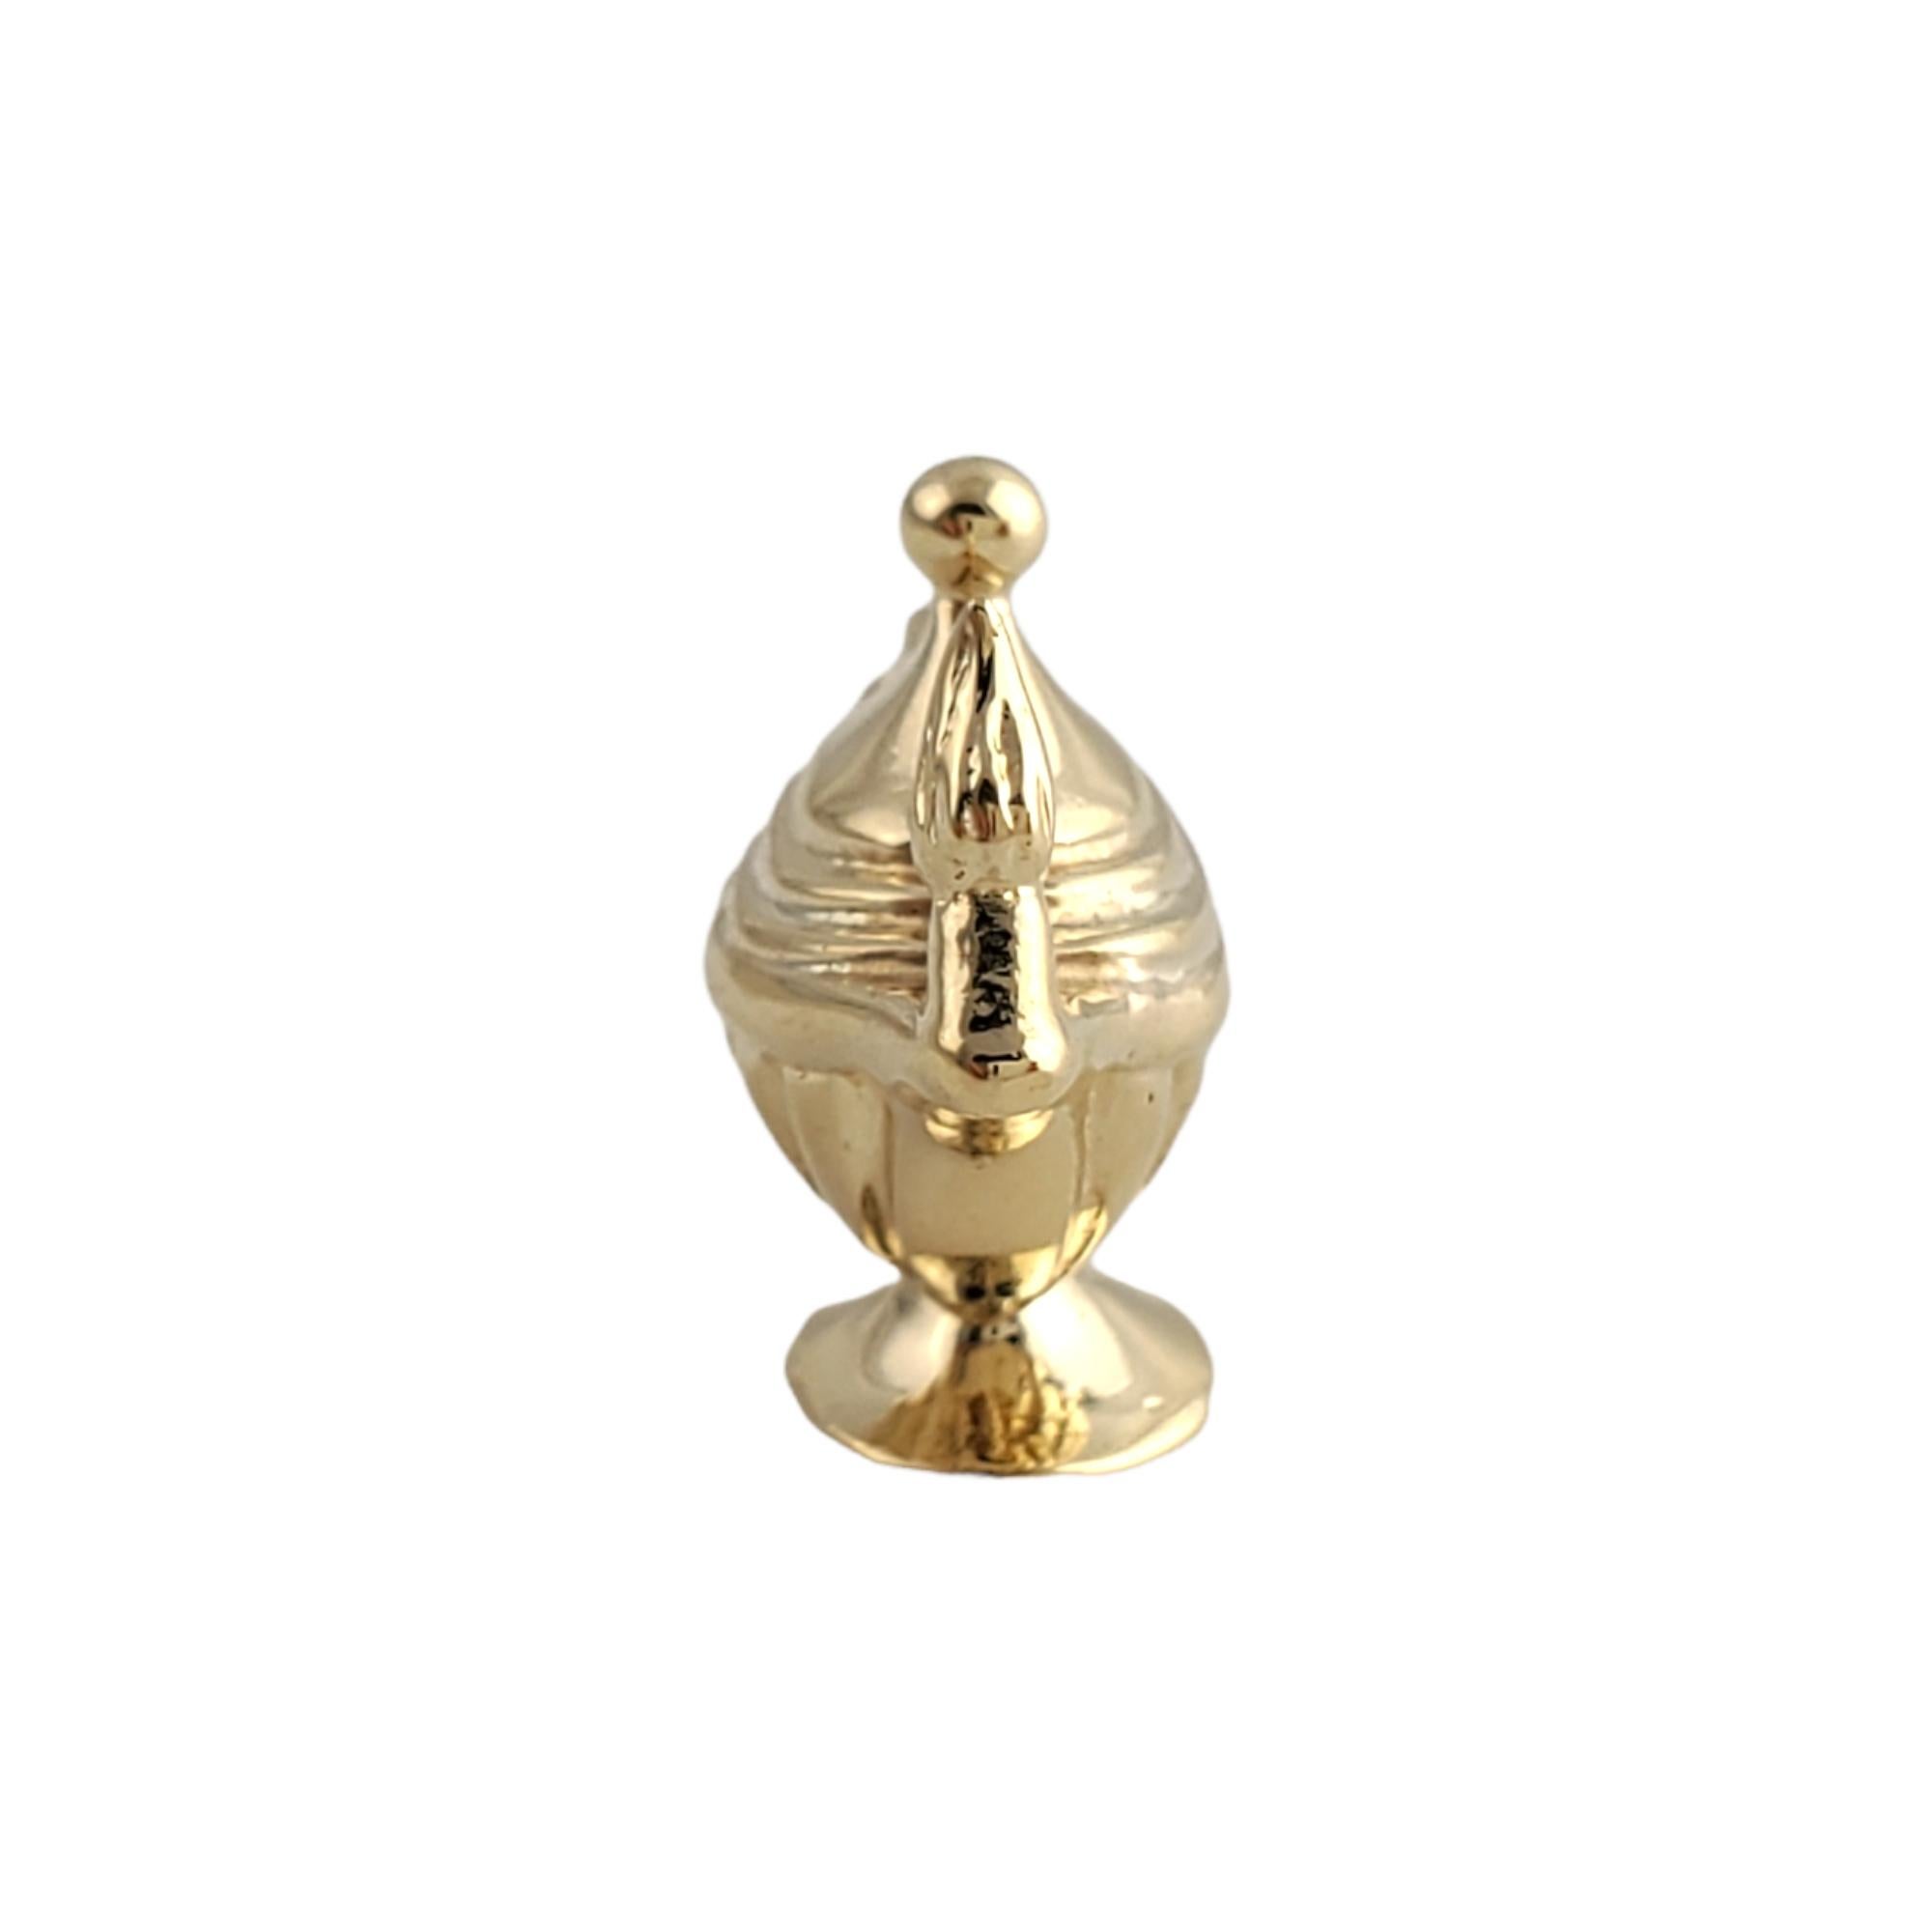 14K Yellow Gold Magic Lamp Charm

You'll love this awesome yellow gold magic lamp charm! 

Size: 15.58mm X 22.31mm

Weight:  4.0gr /  2.5dwt

Hallmark: A. C 14K 

Very good condition, professionally polished.

Will come packaged in a gift box and